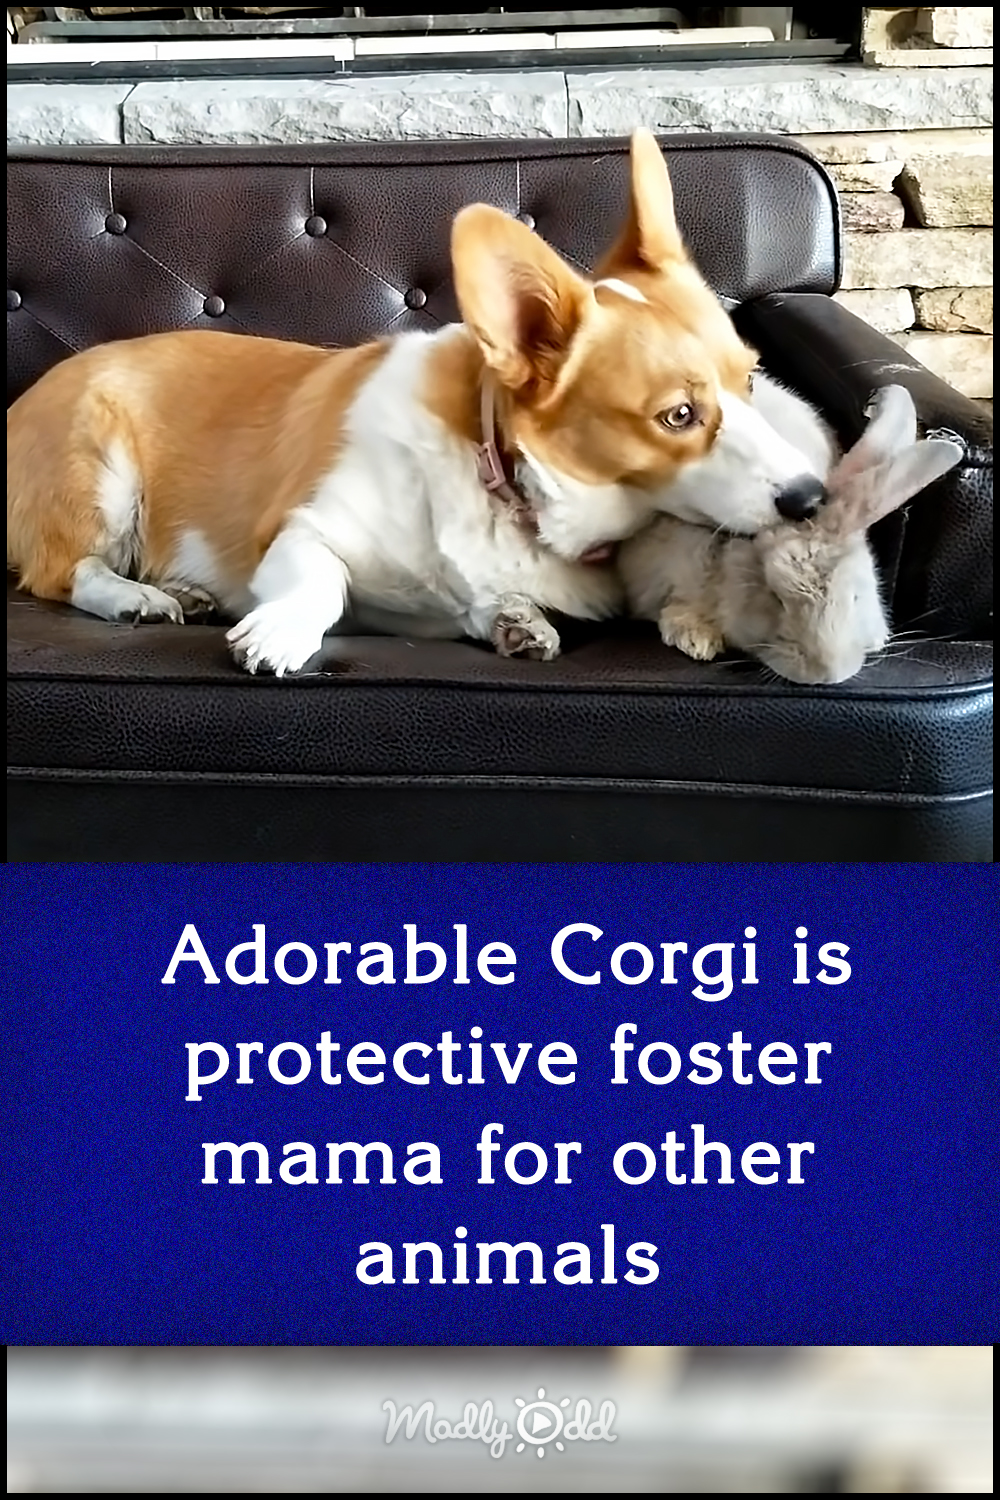 Adorable Corgi is protective foster mama for other animals